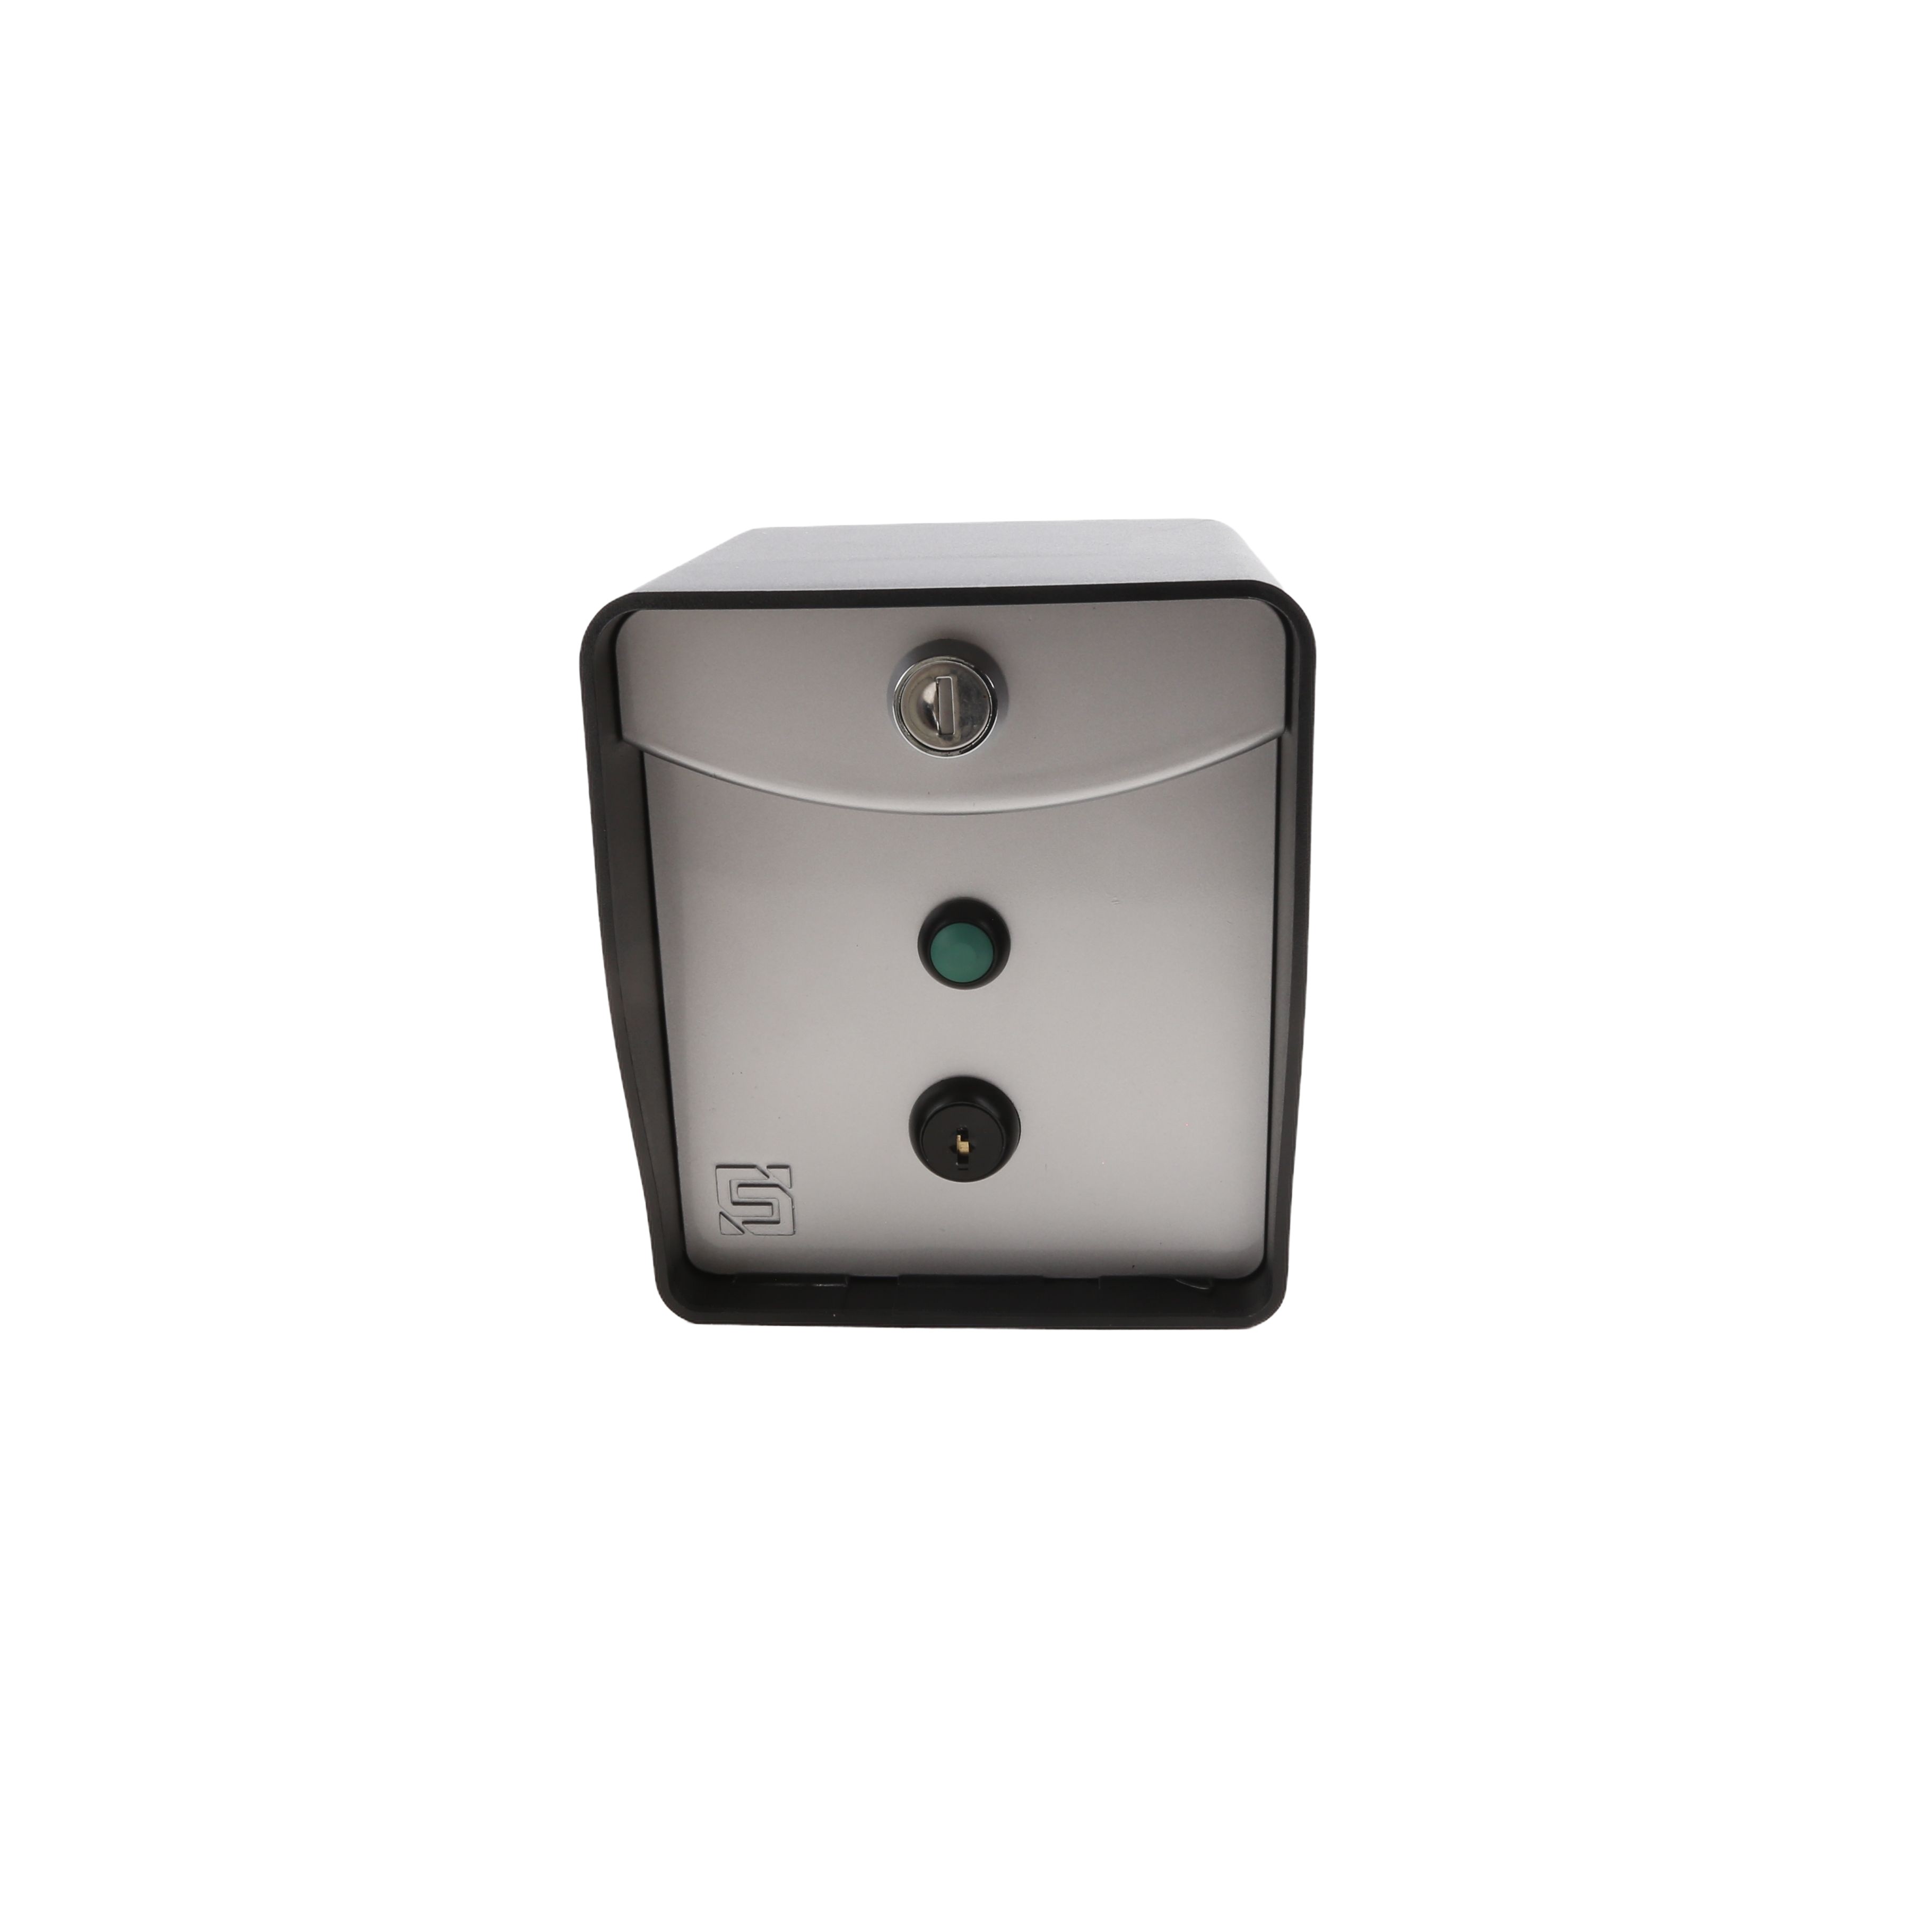 Request To Exit Wireless Push Button Post Mount Push Button Keypad